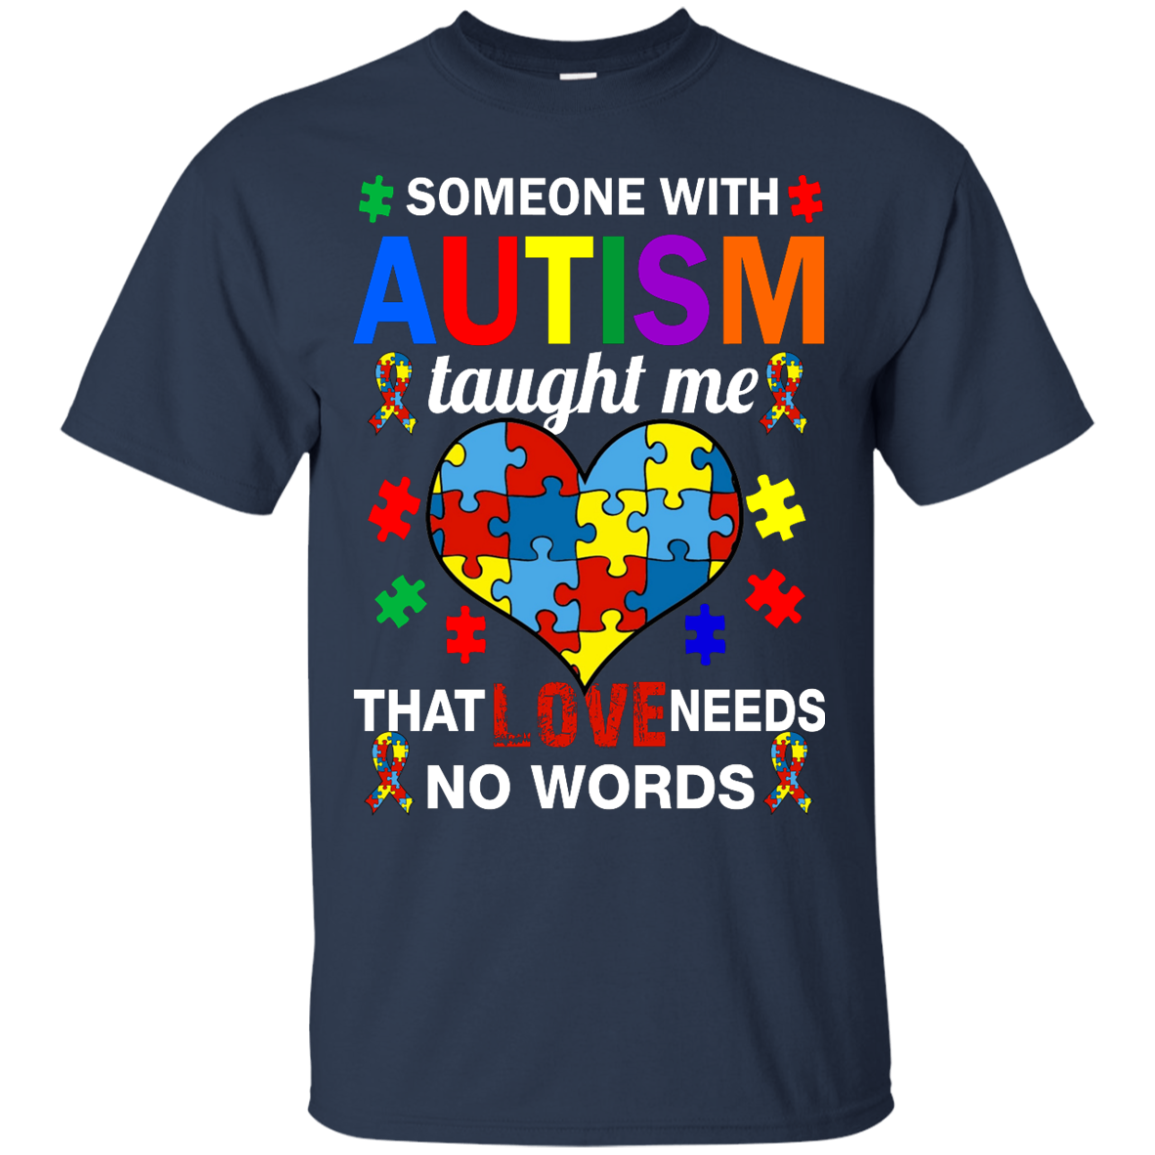 Someone With Autism Taught Me That Love Needs No Words shirt